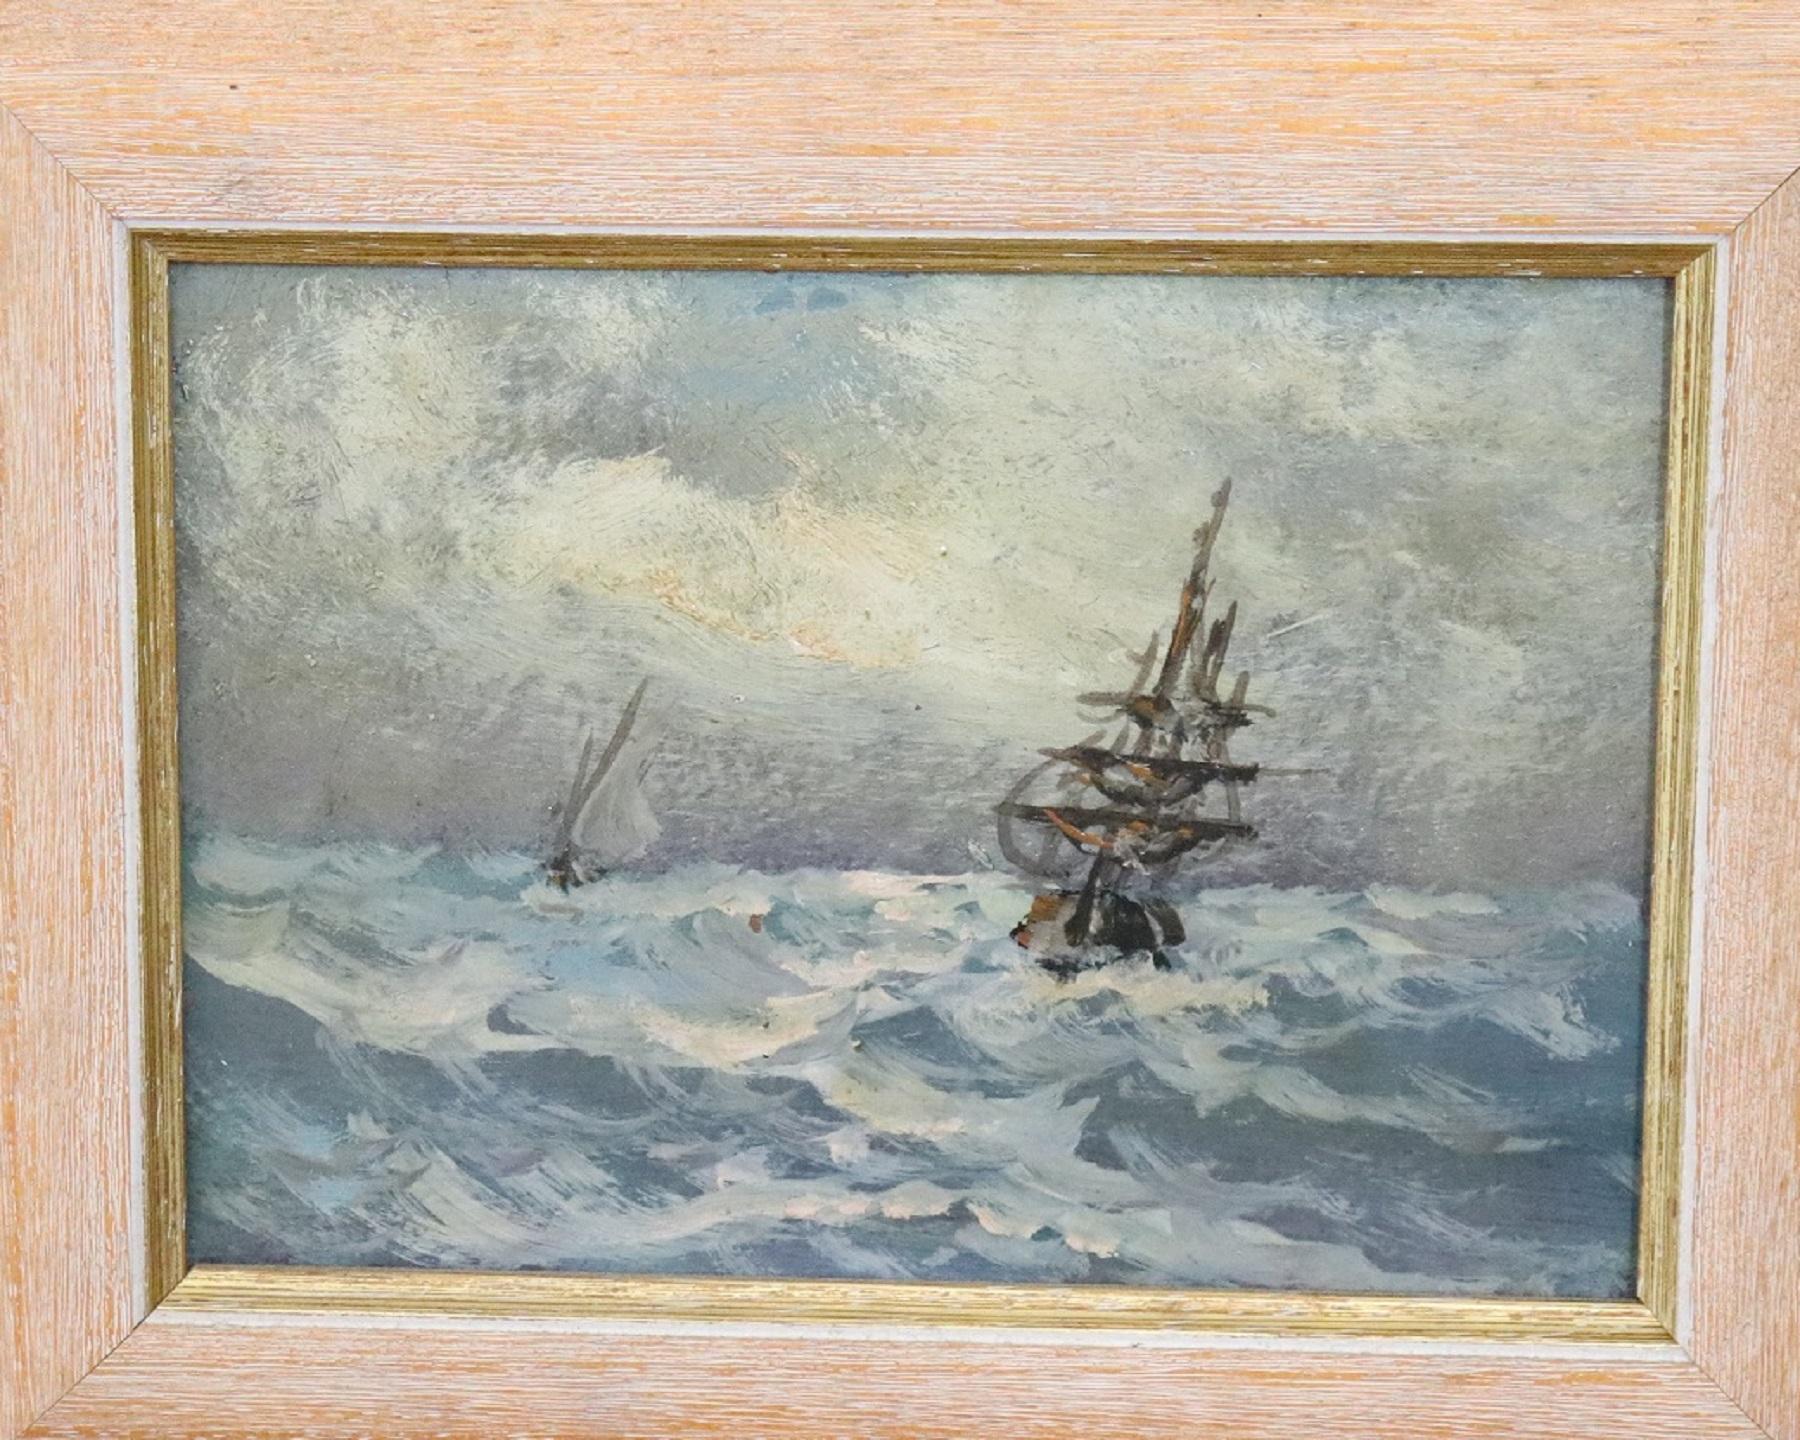 Oiled 20th Century Oil Painting on Hardboard Marine with Boats